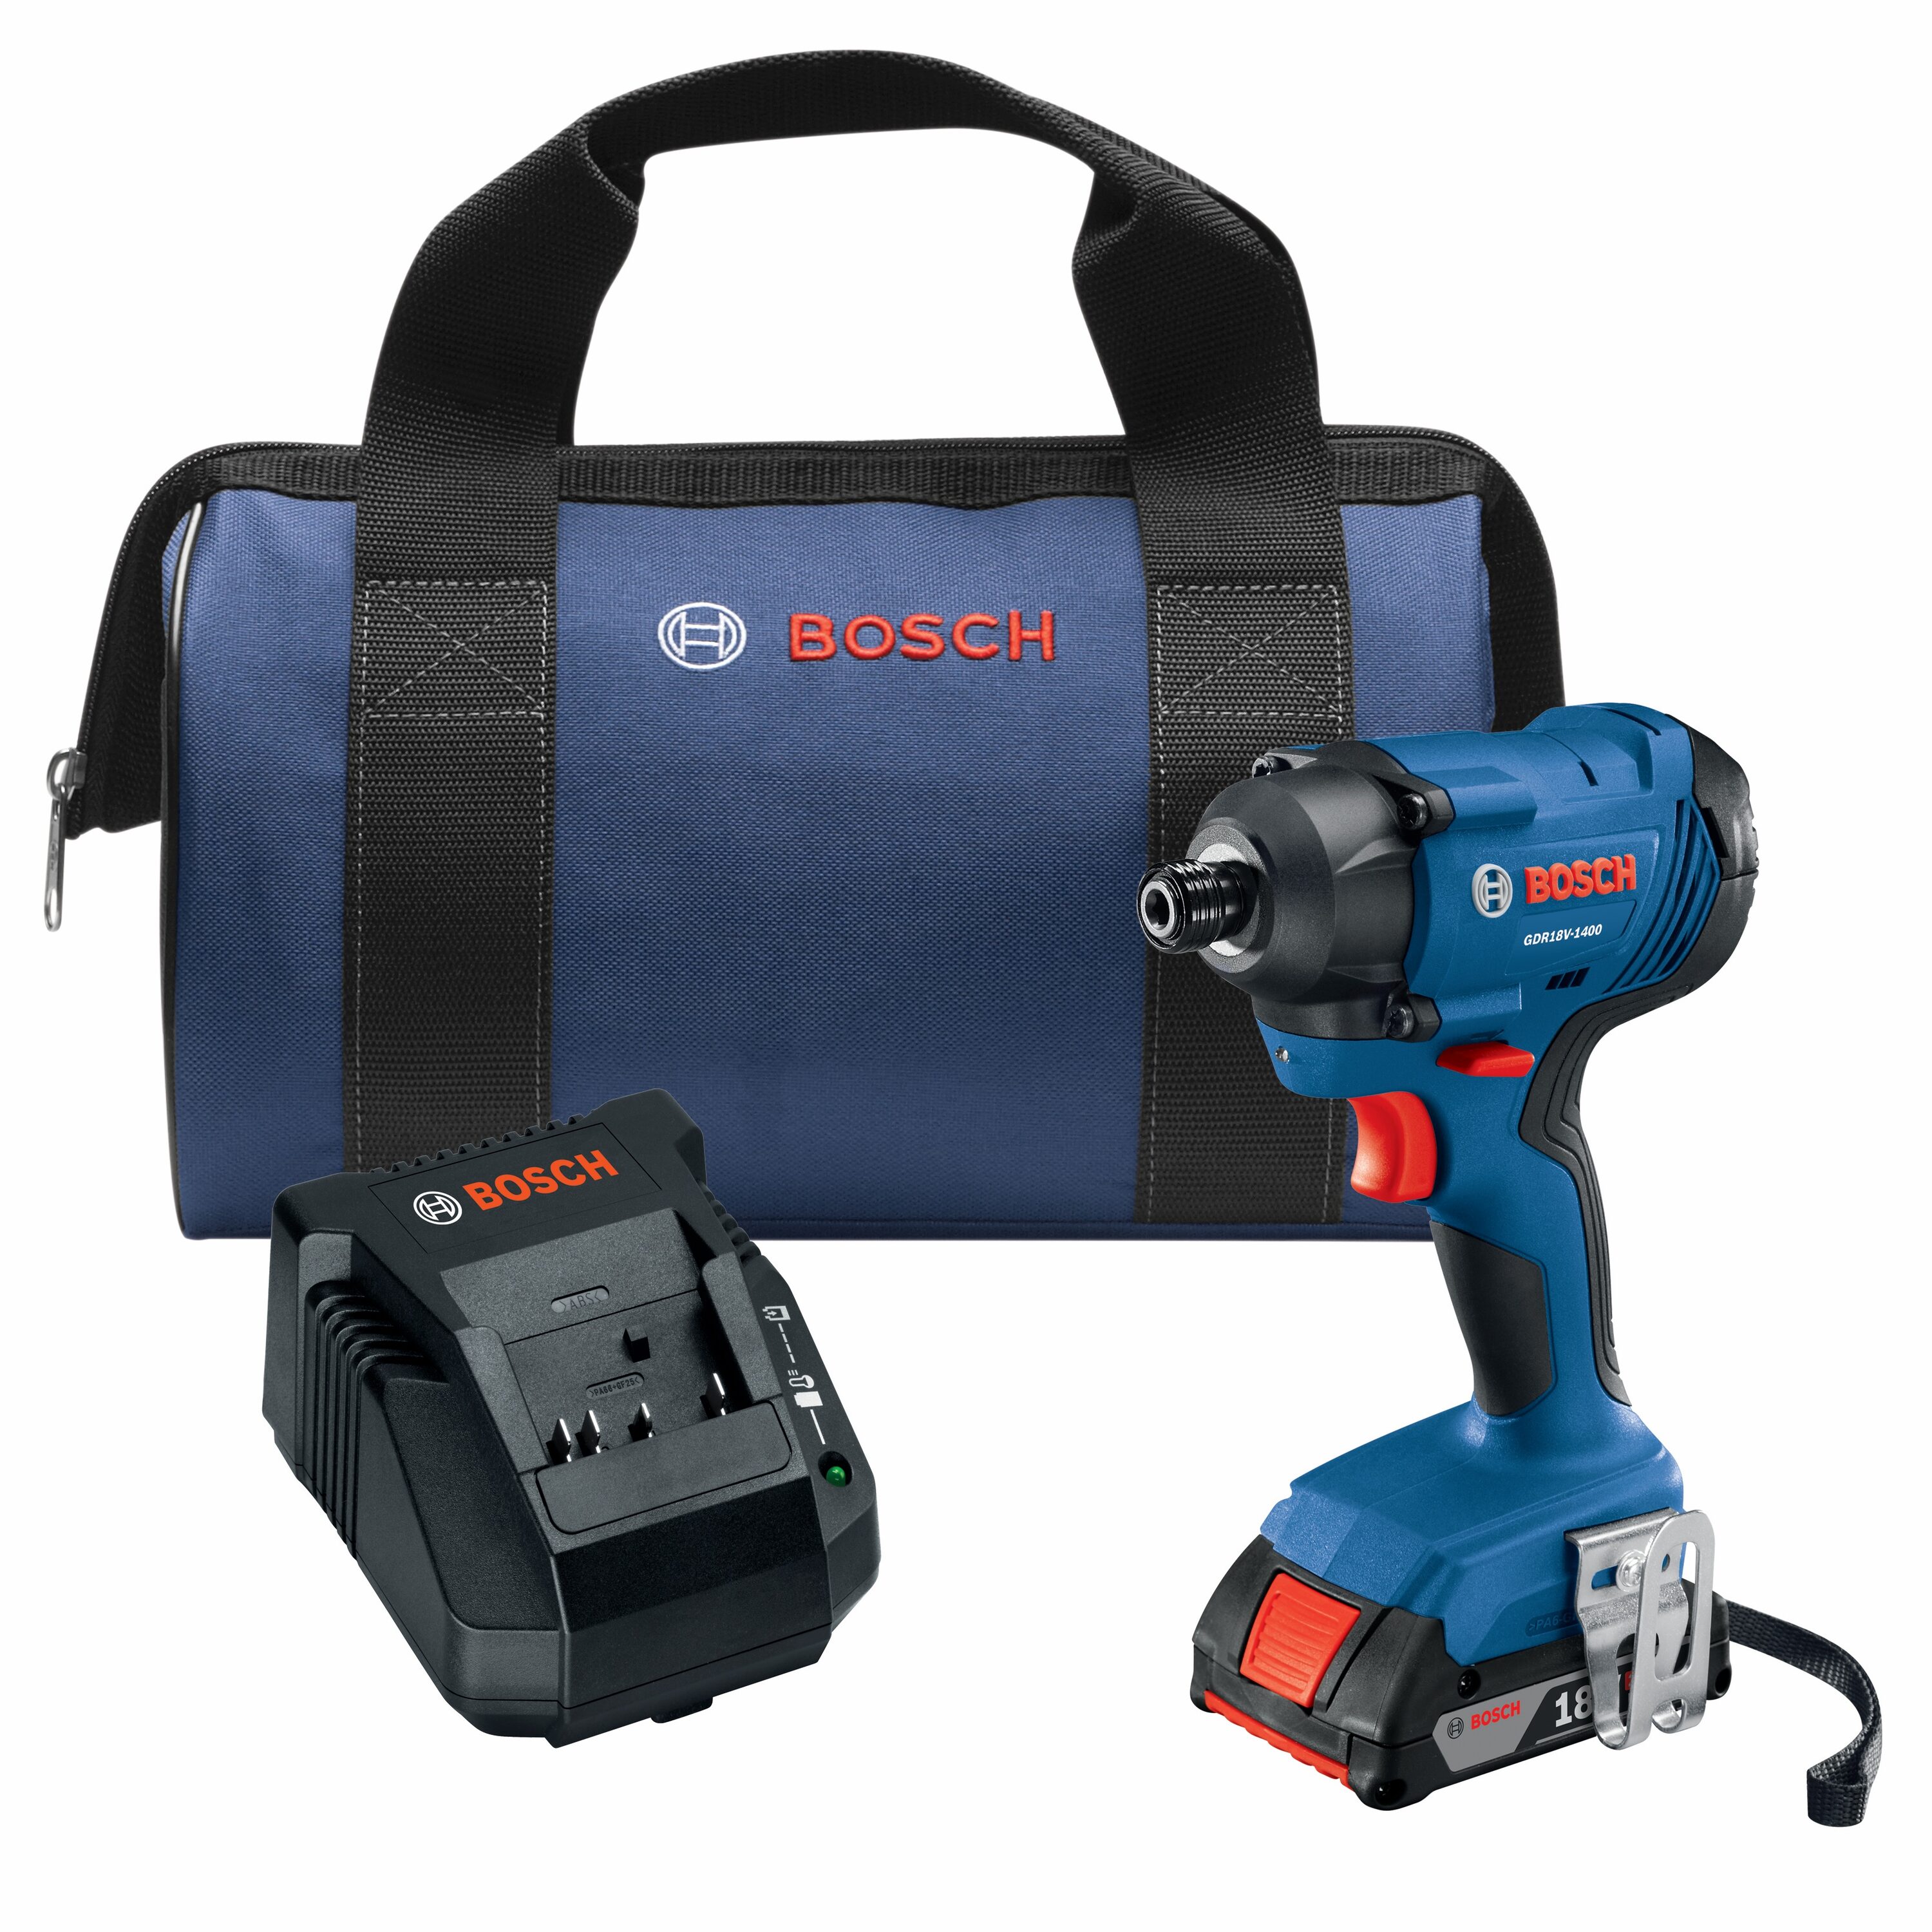 Bosch 18-volt 1/4-in Variable Speed Cordless Impact Driver (1-Battery  Included)